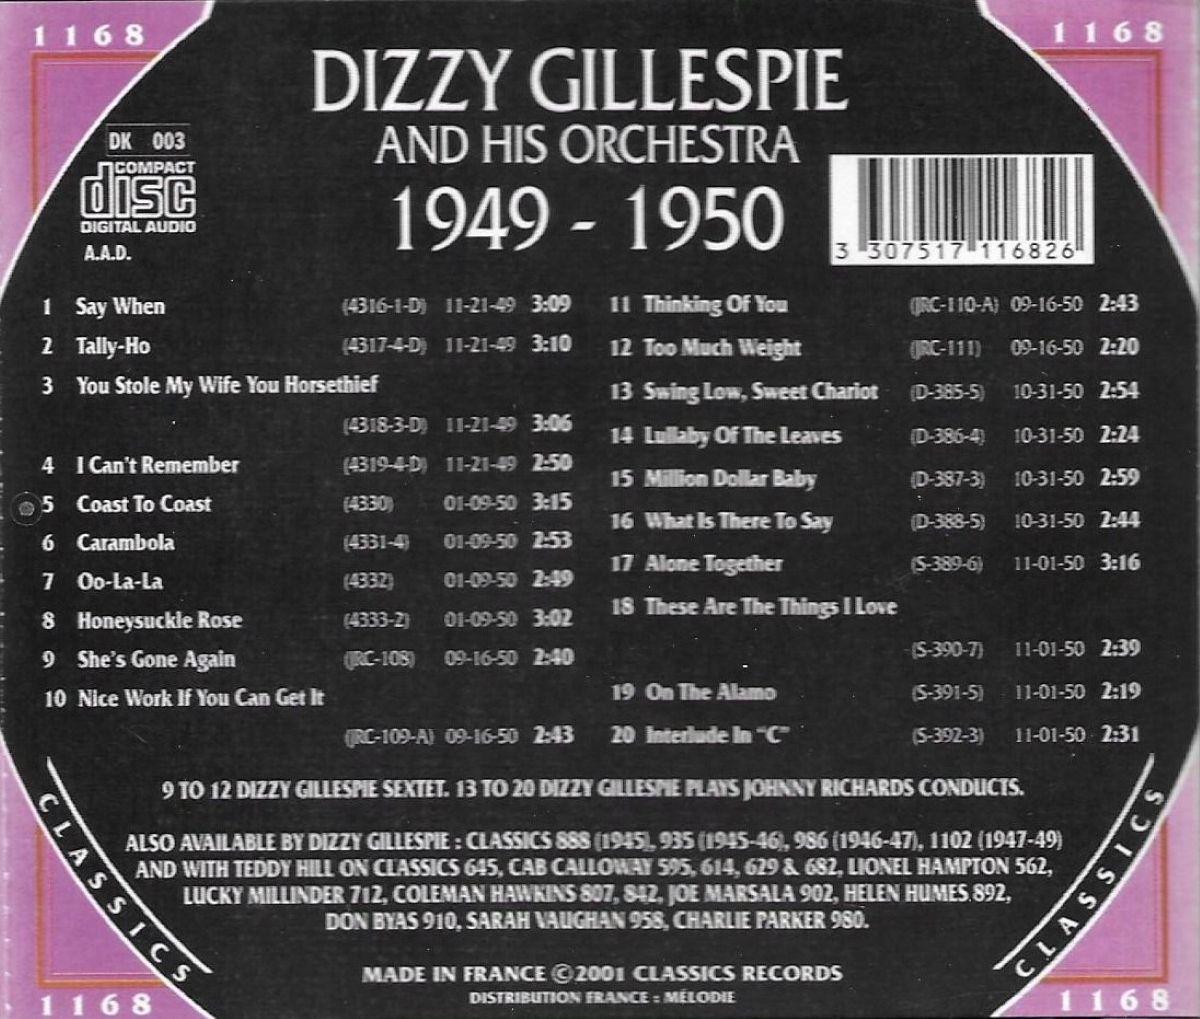 The Chronological Dizzy Gillespie And His Orchestra-1949-1950